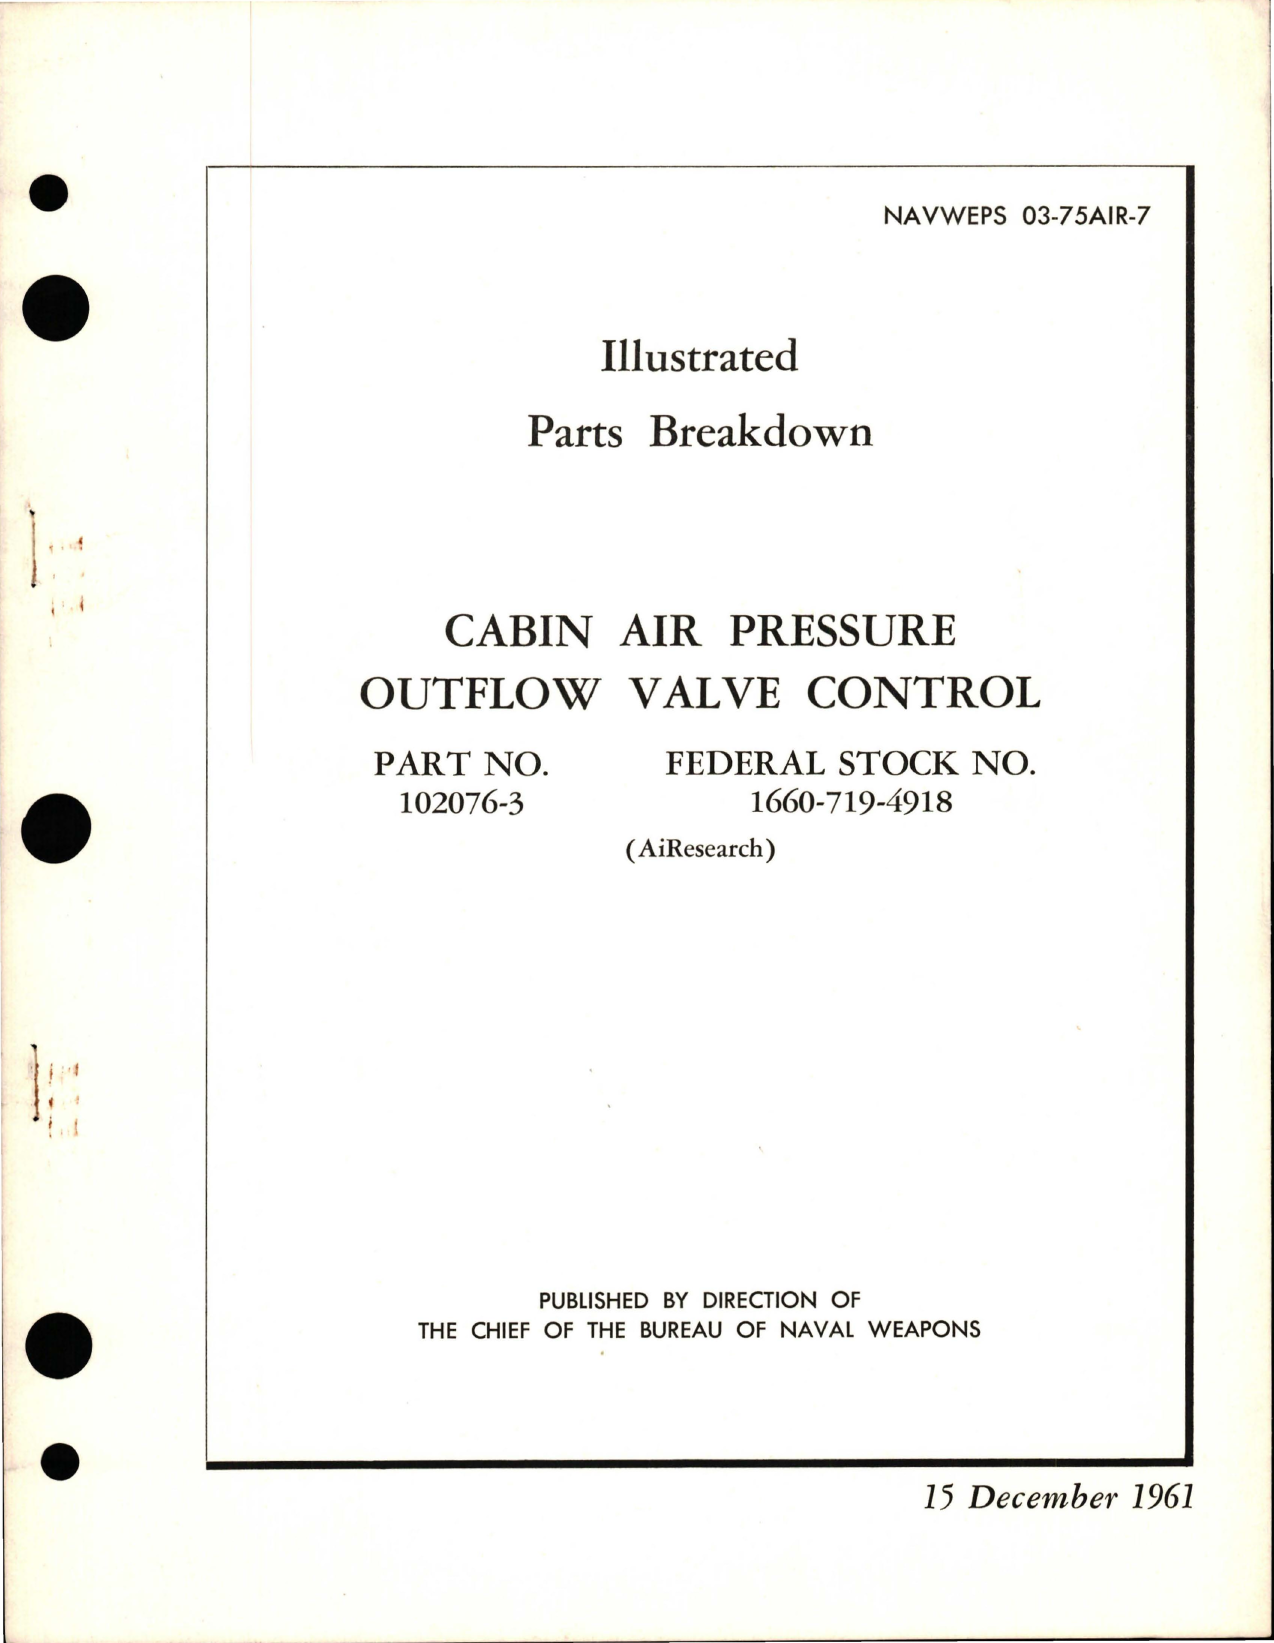 Sample page 1 from AirCorps Library document: Illustrated Parts Breakdown for Cabin Air Pressure Outflow Valve Control - Part 102076-3